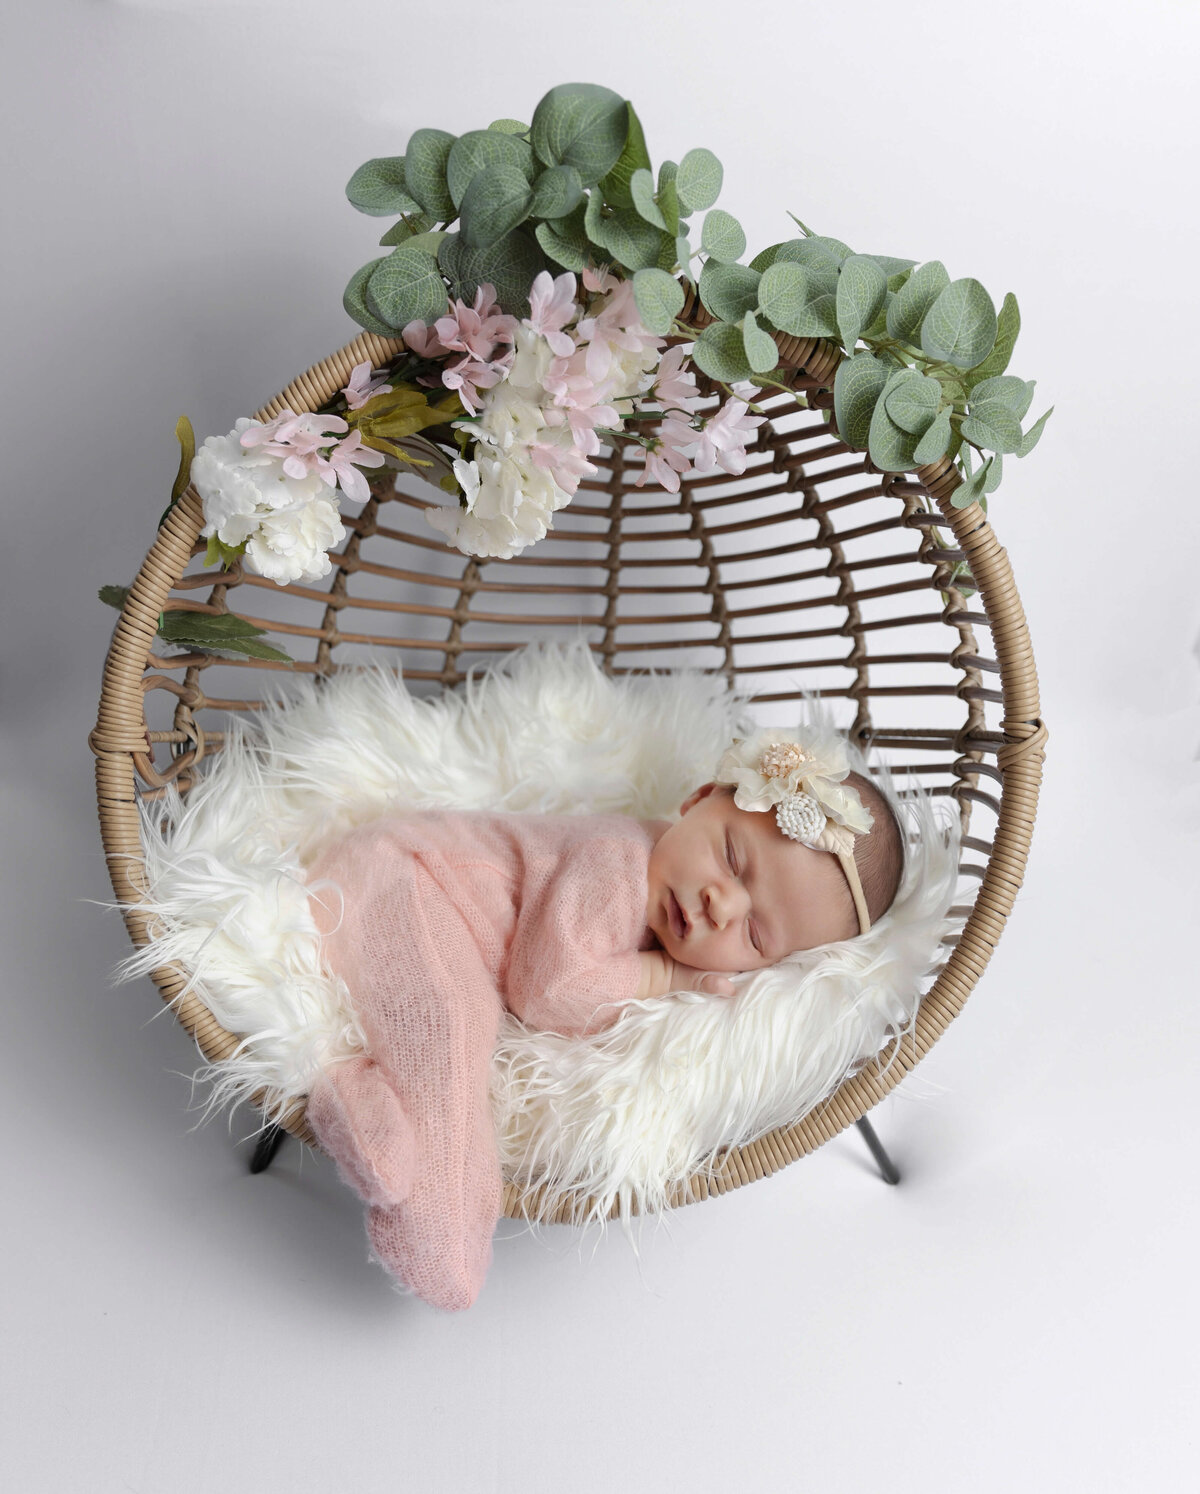 Newborn photo of a baby girl in a pink sleeper posed in an Erie Pa photography studio